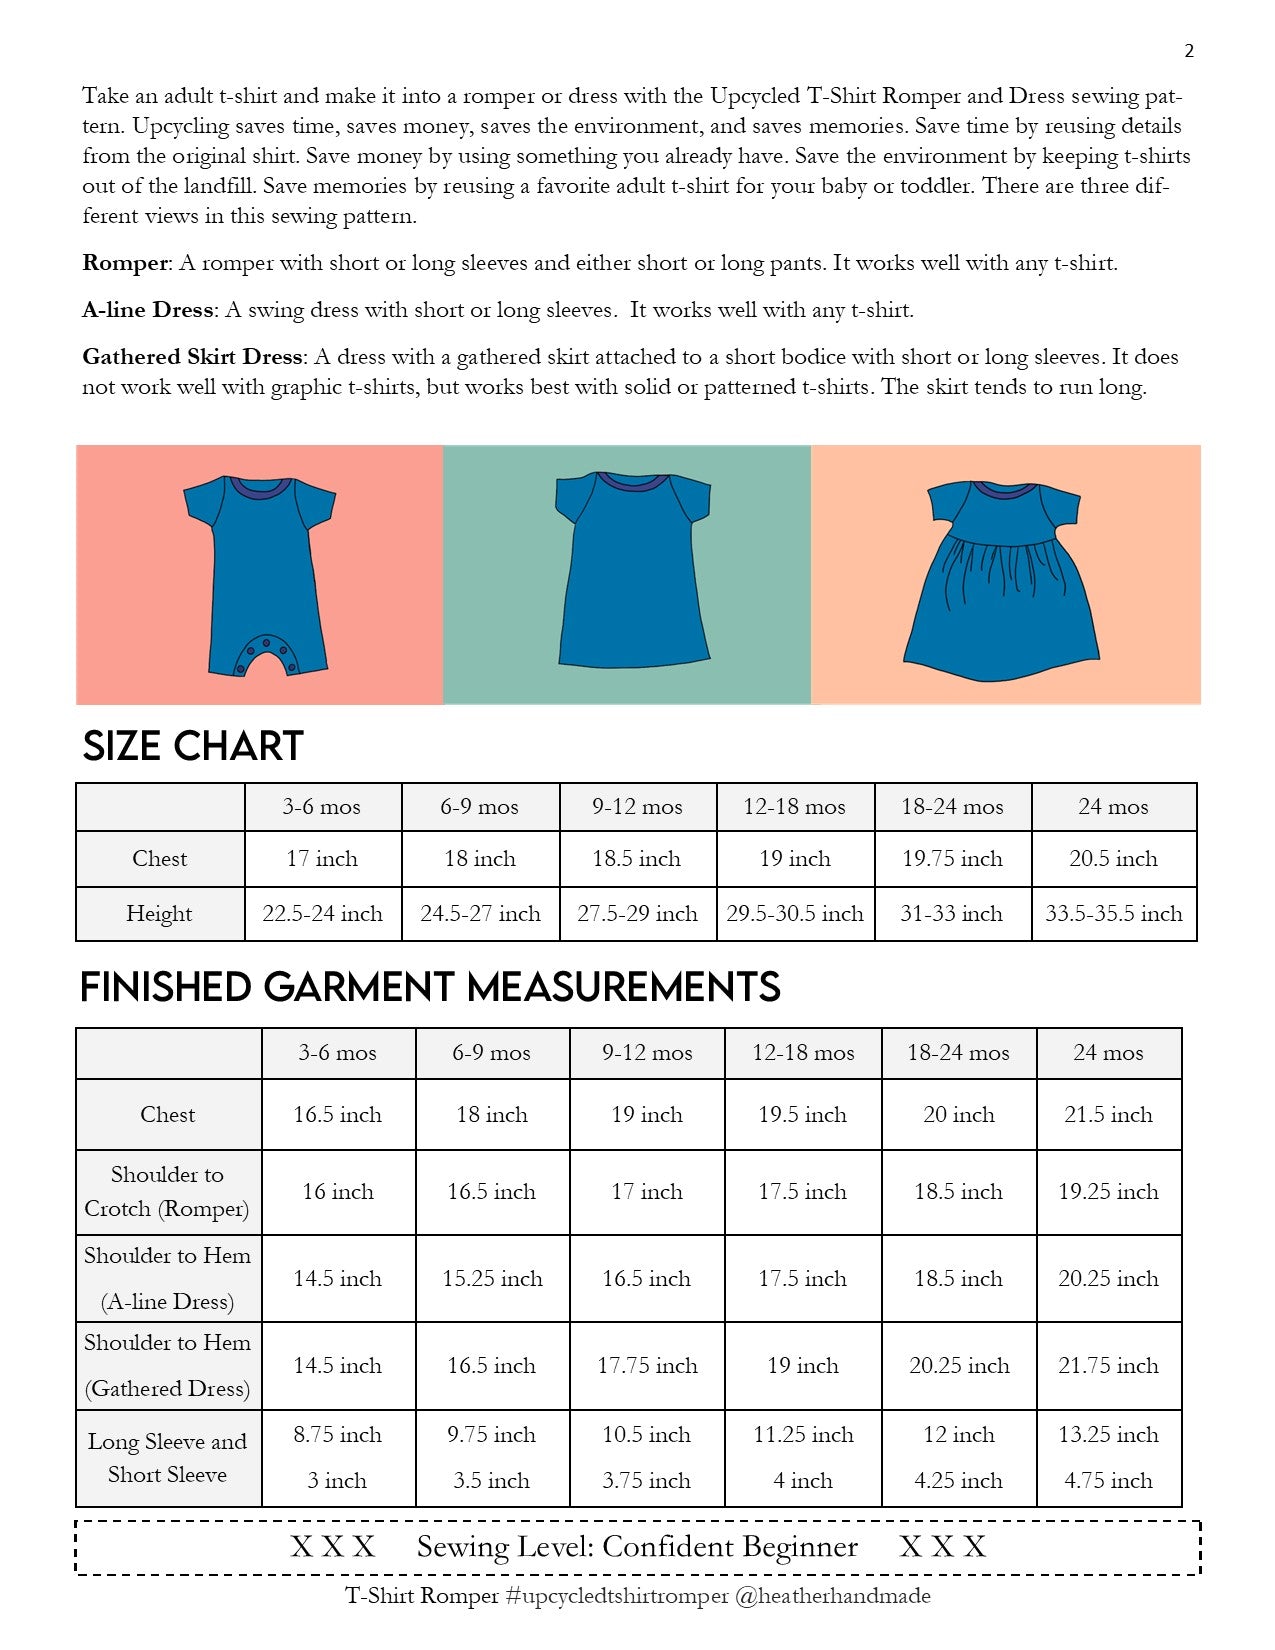 Upcycled T-Shirt Romper and Dress Sewing Pattern